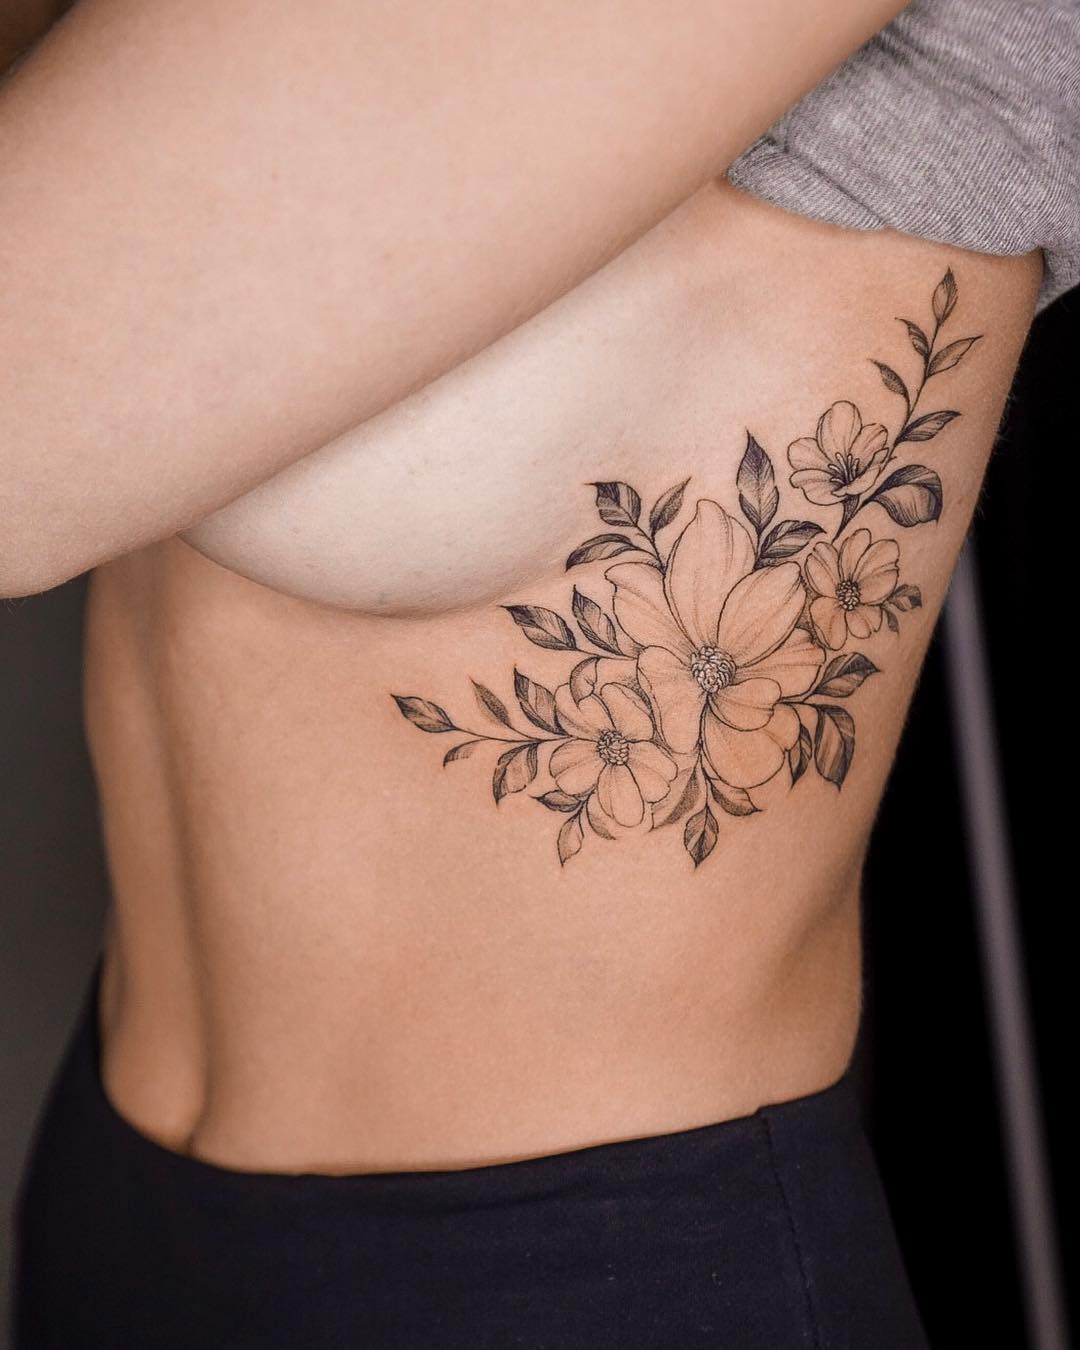 Tattoo Ideas: Floral | Gallery posted by Acaldeira.ink | Lemon8